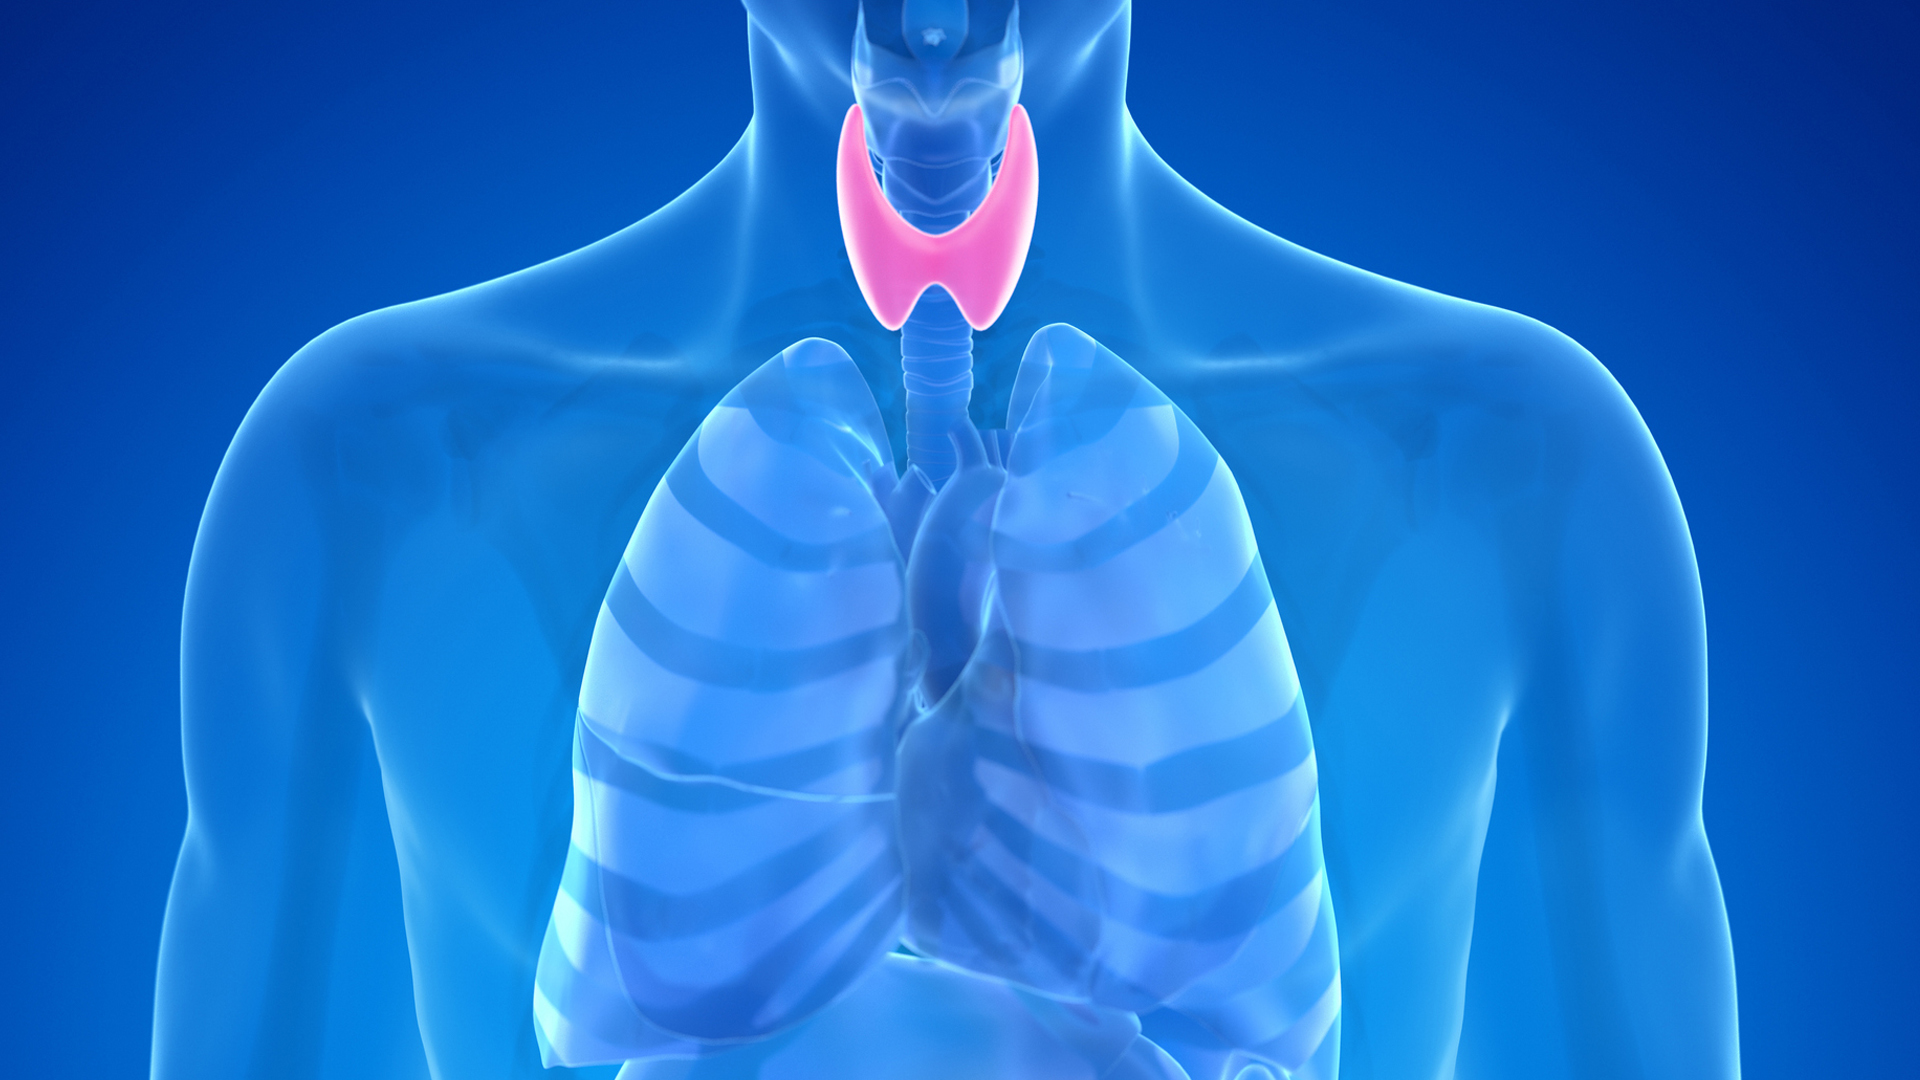 Thyroid Gland: Facts, function & diseases